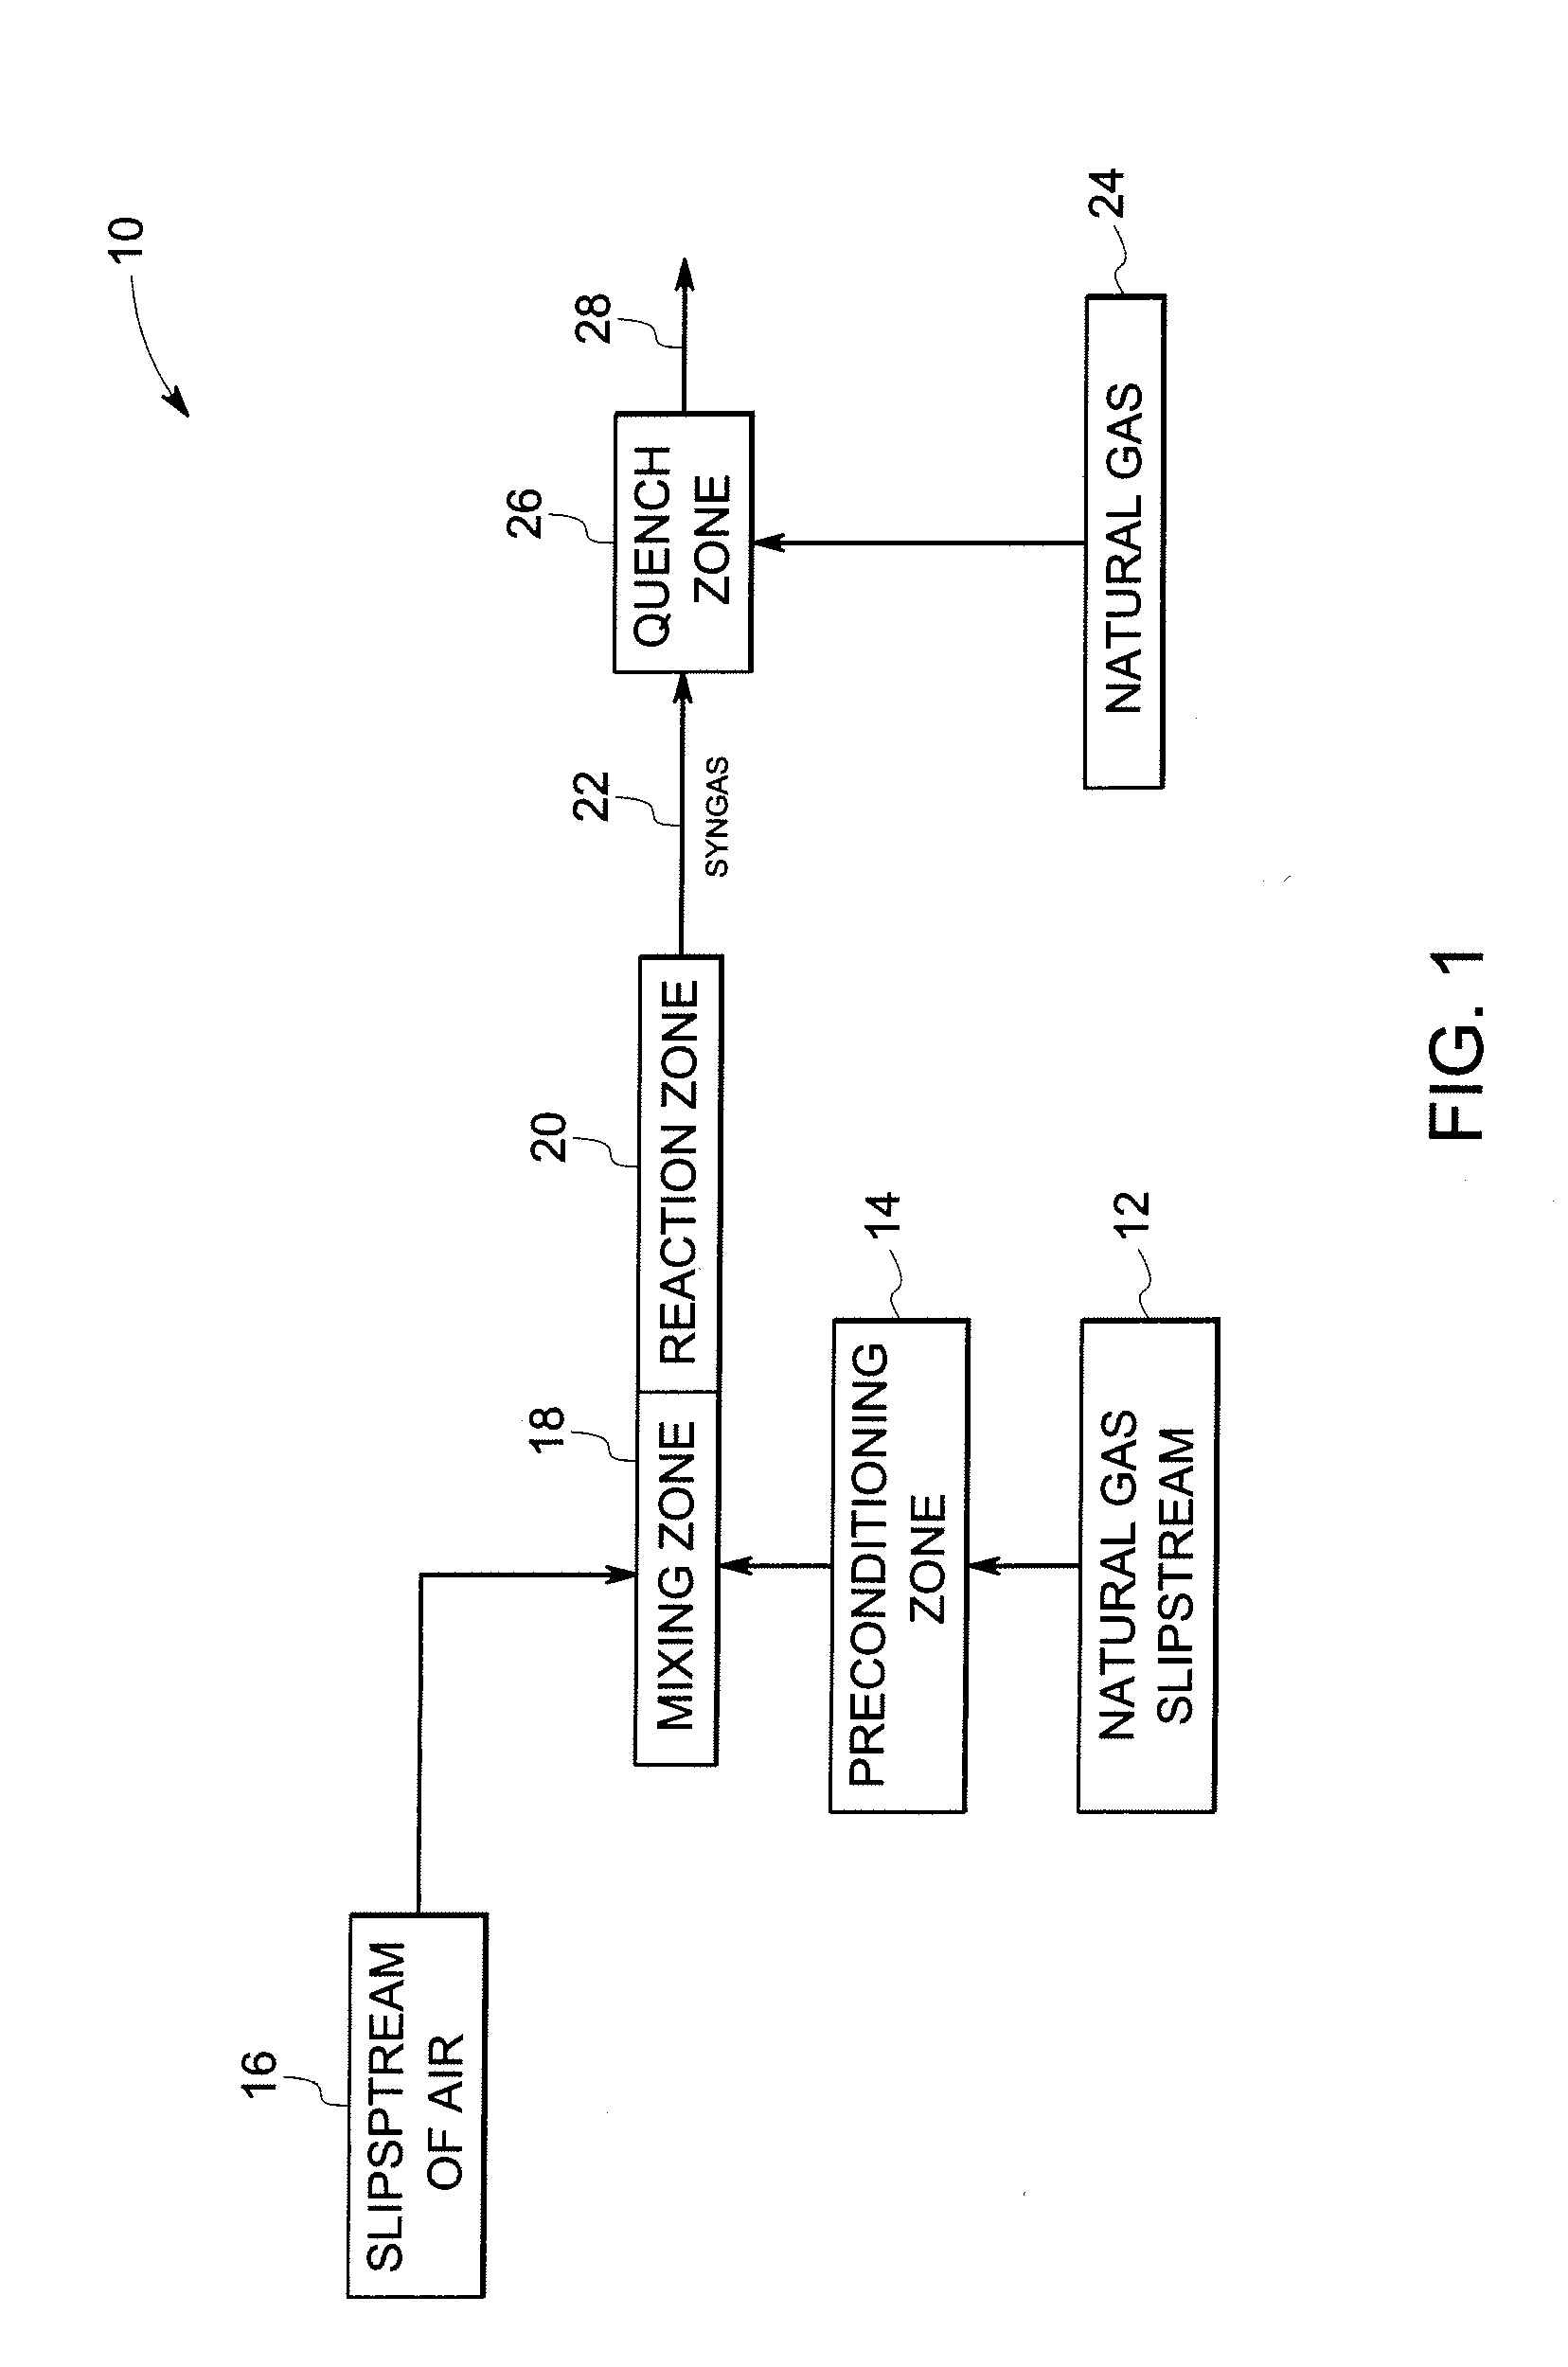 Fuel reformer system and a method for operating the same